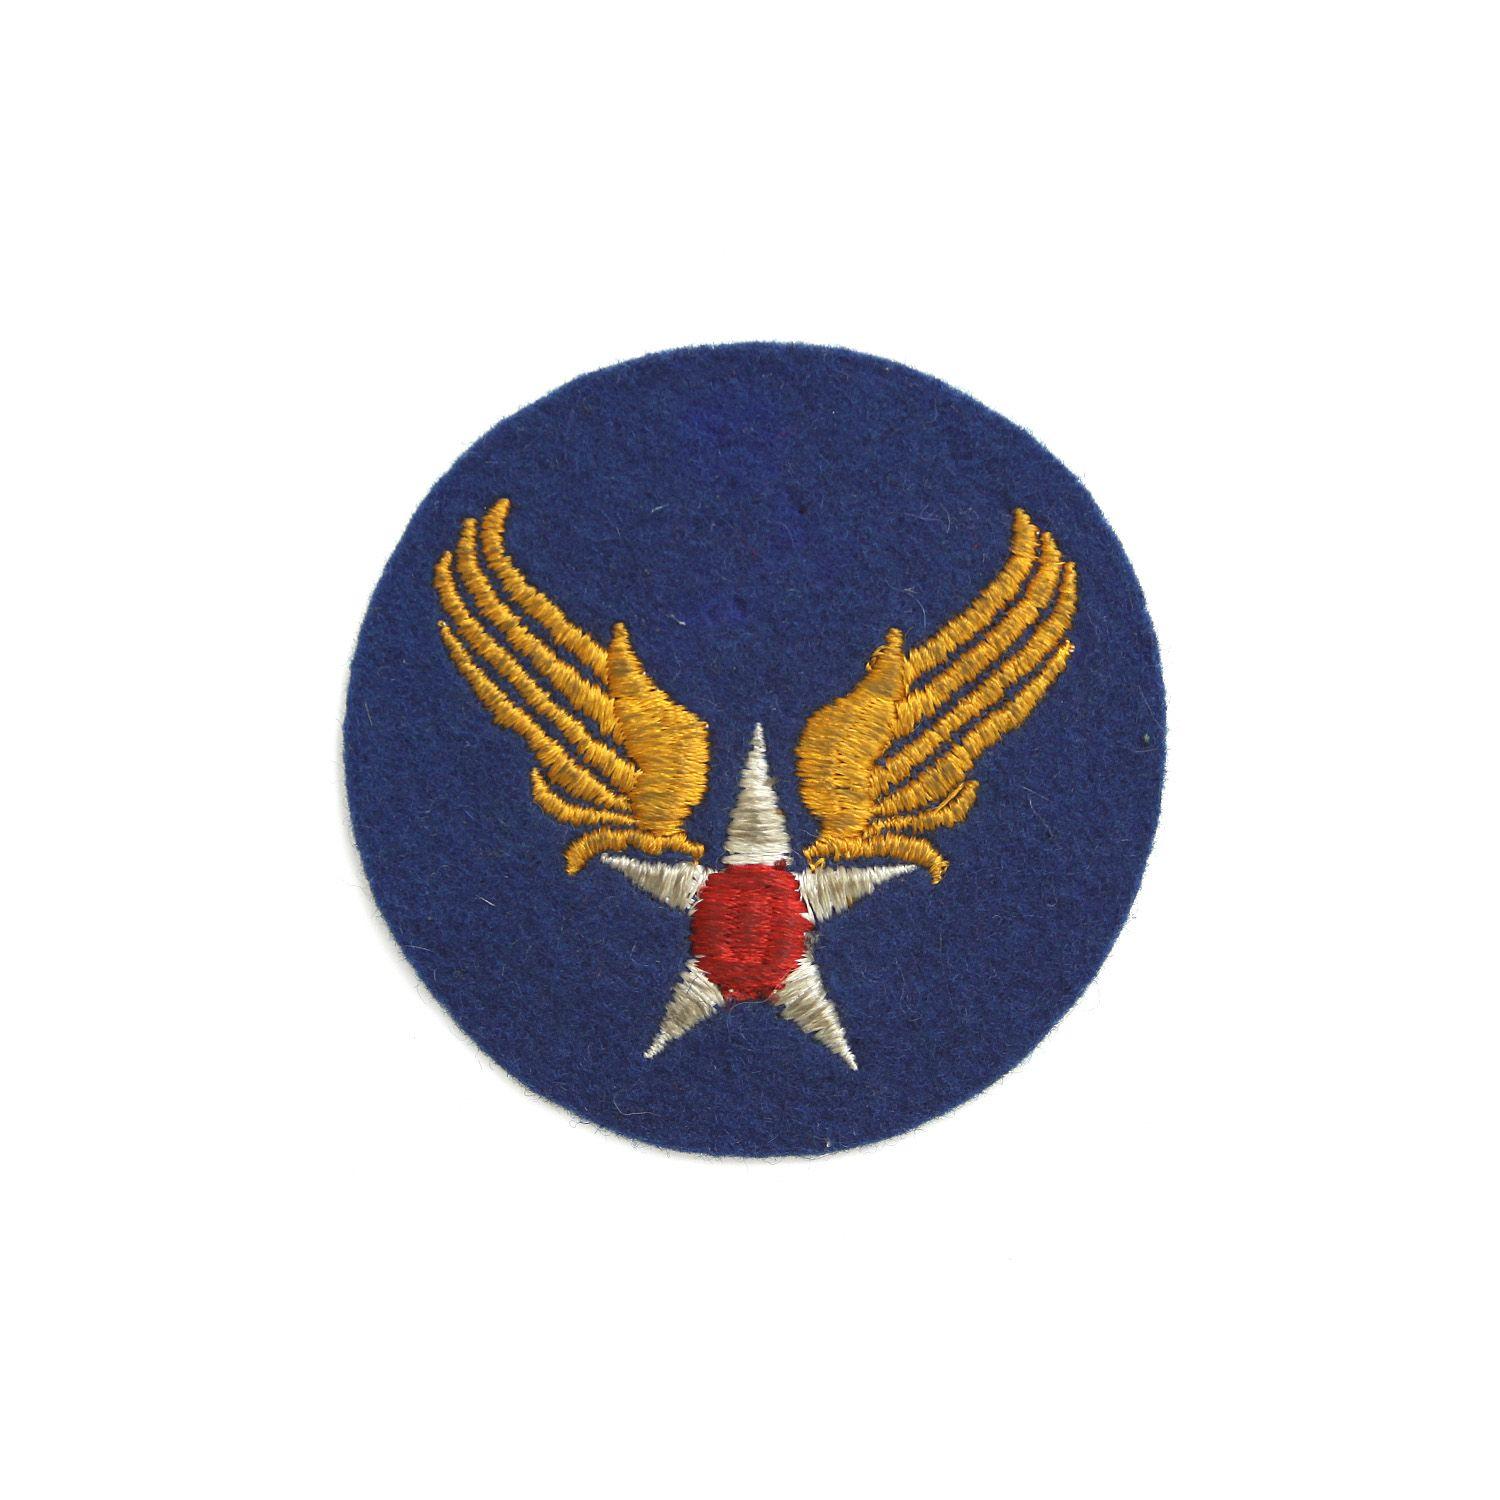 U.S. Army Air Force Logo - U.S. Army Air Force Patch - Felt - Air Mobility Command Museum